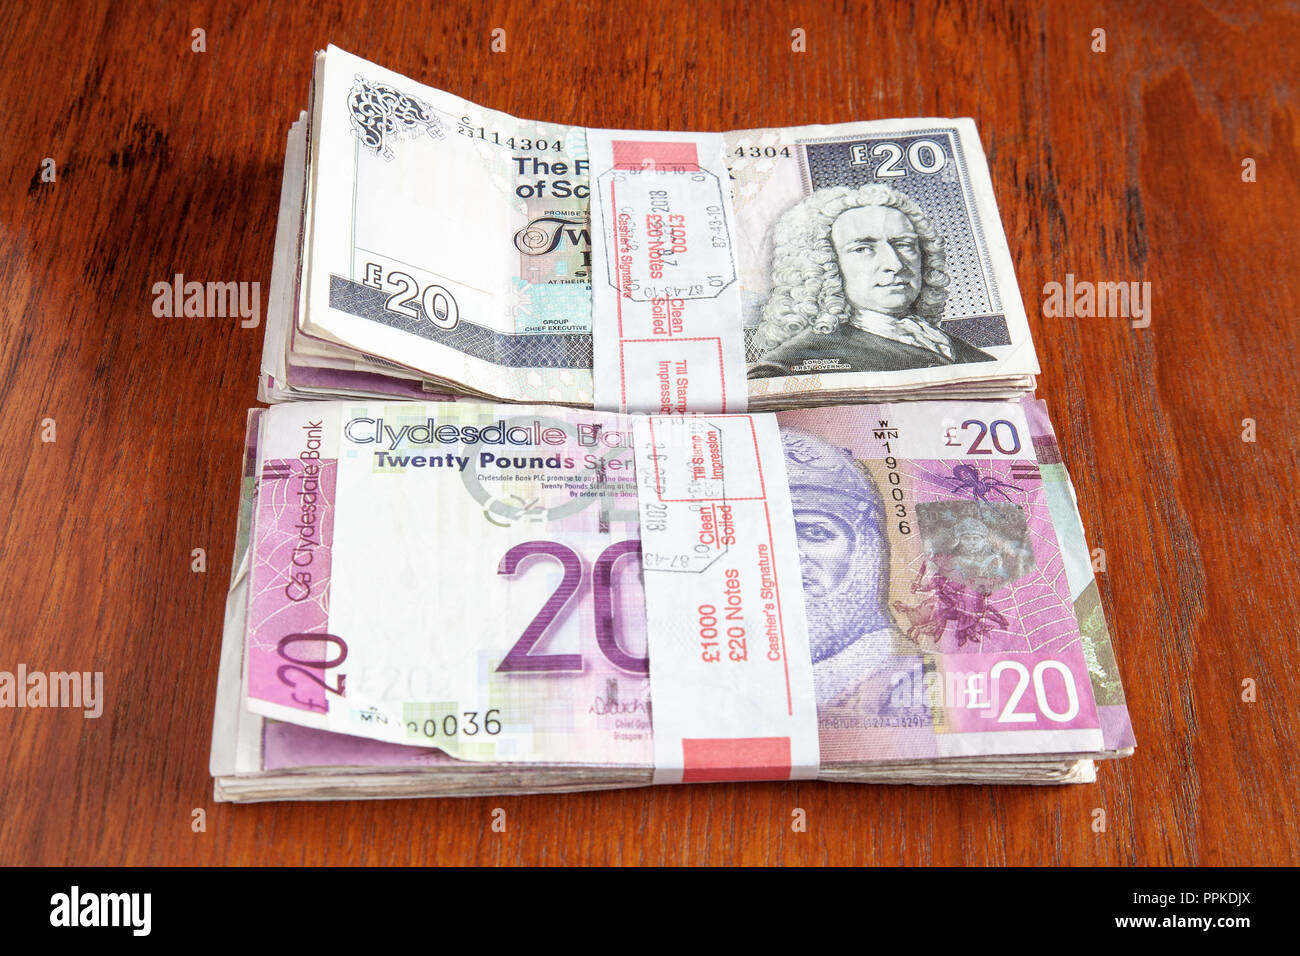 Money left on the table. £2000 sterling in used Scottish £20 banknotes, from the Royal Bank of Scotland and the Clydesdale Bank. Shallow dof. Stock Photo